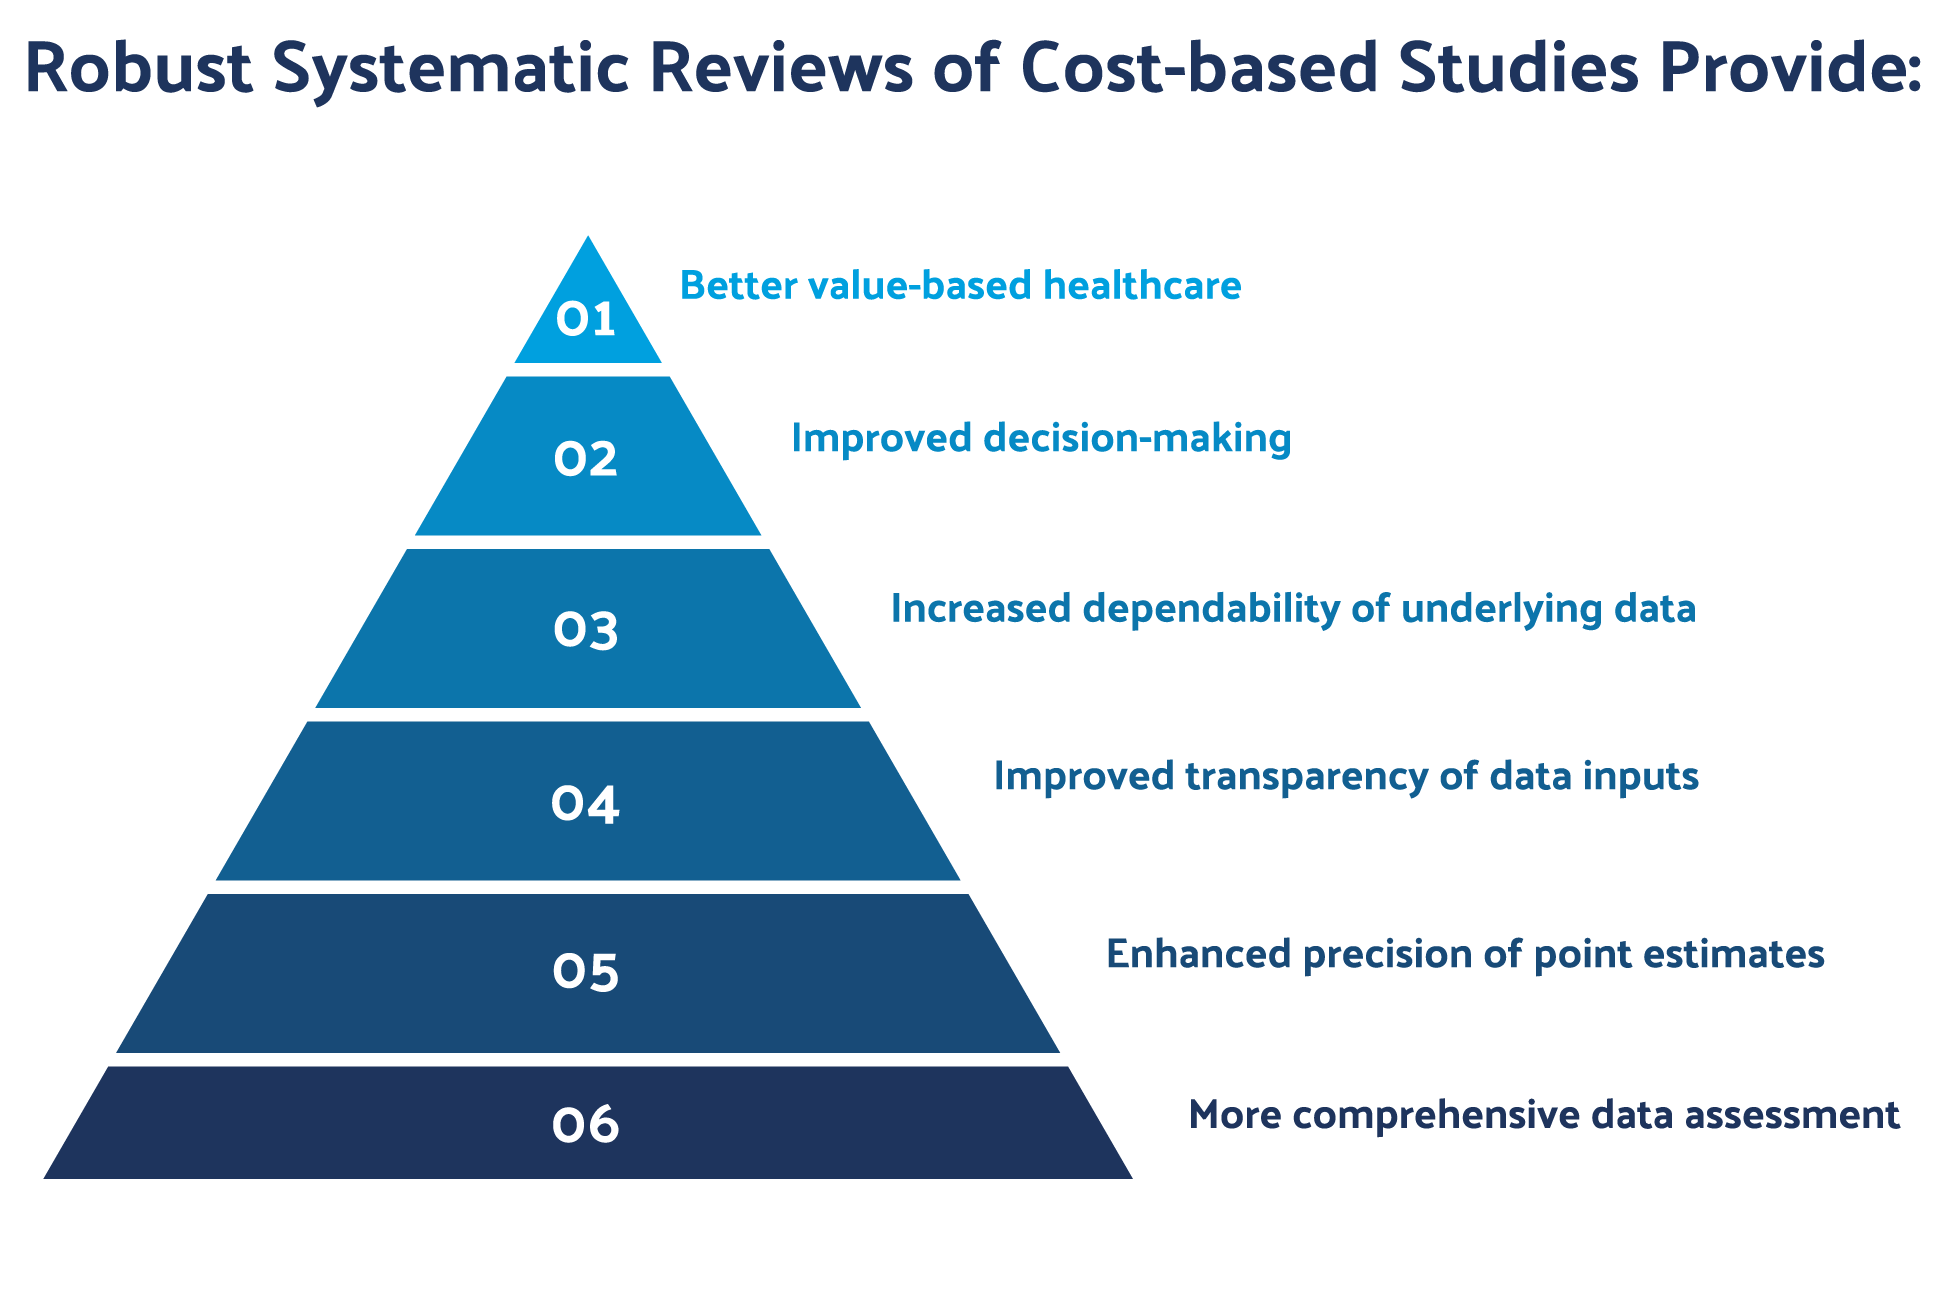 Role of Systematic Reviews in Cost-based Studies.